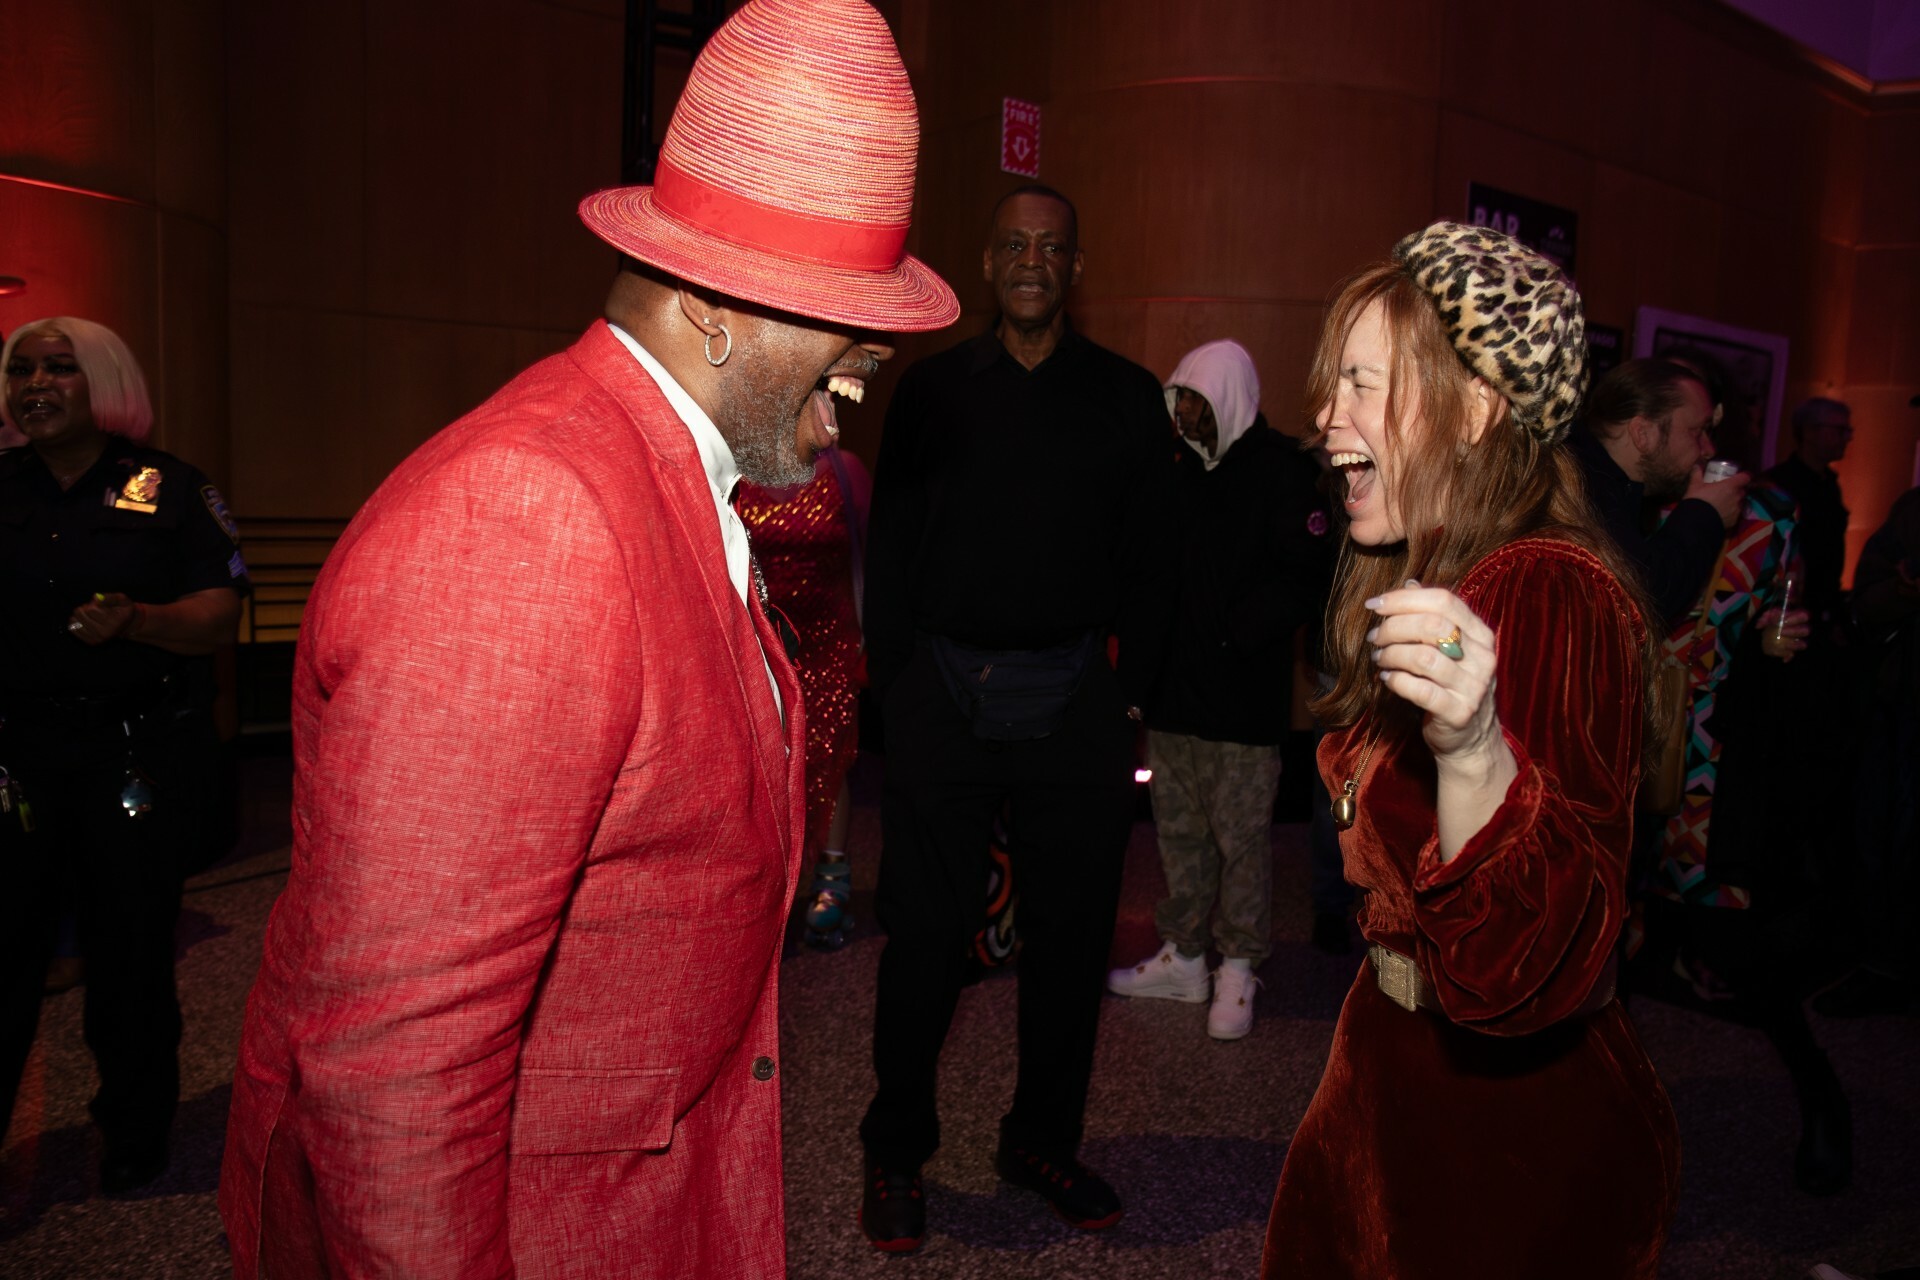 Brooklyn Public Library’s people’s ball - red hat